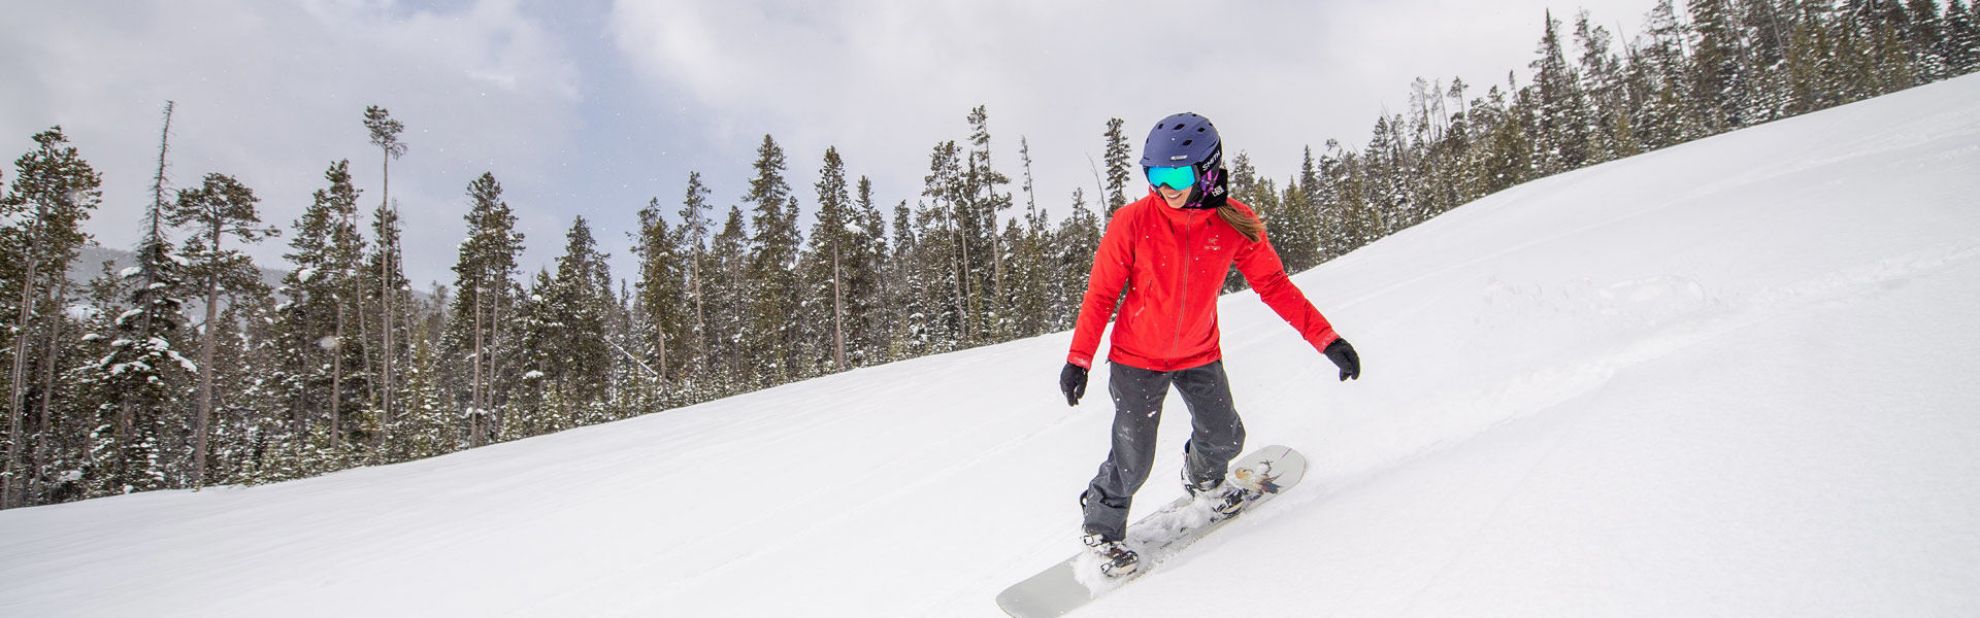 A woman snowboarding in front of trees.